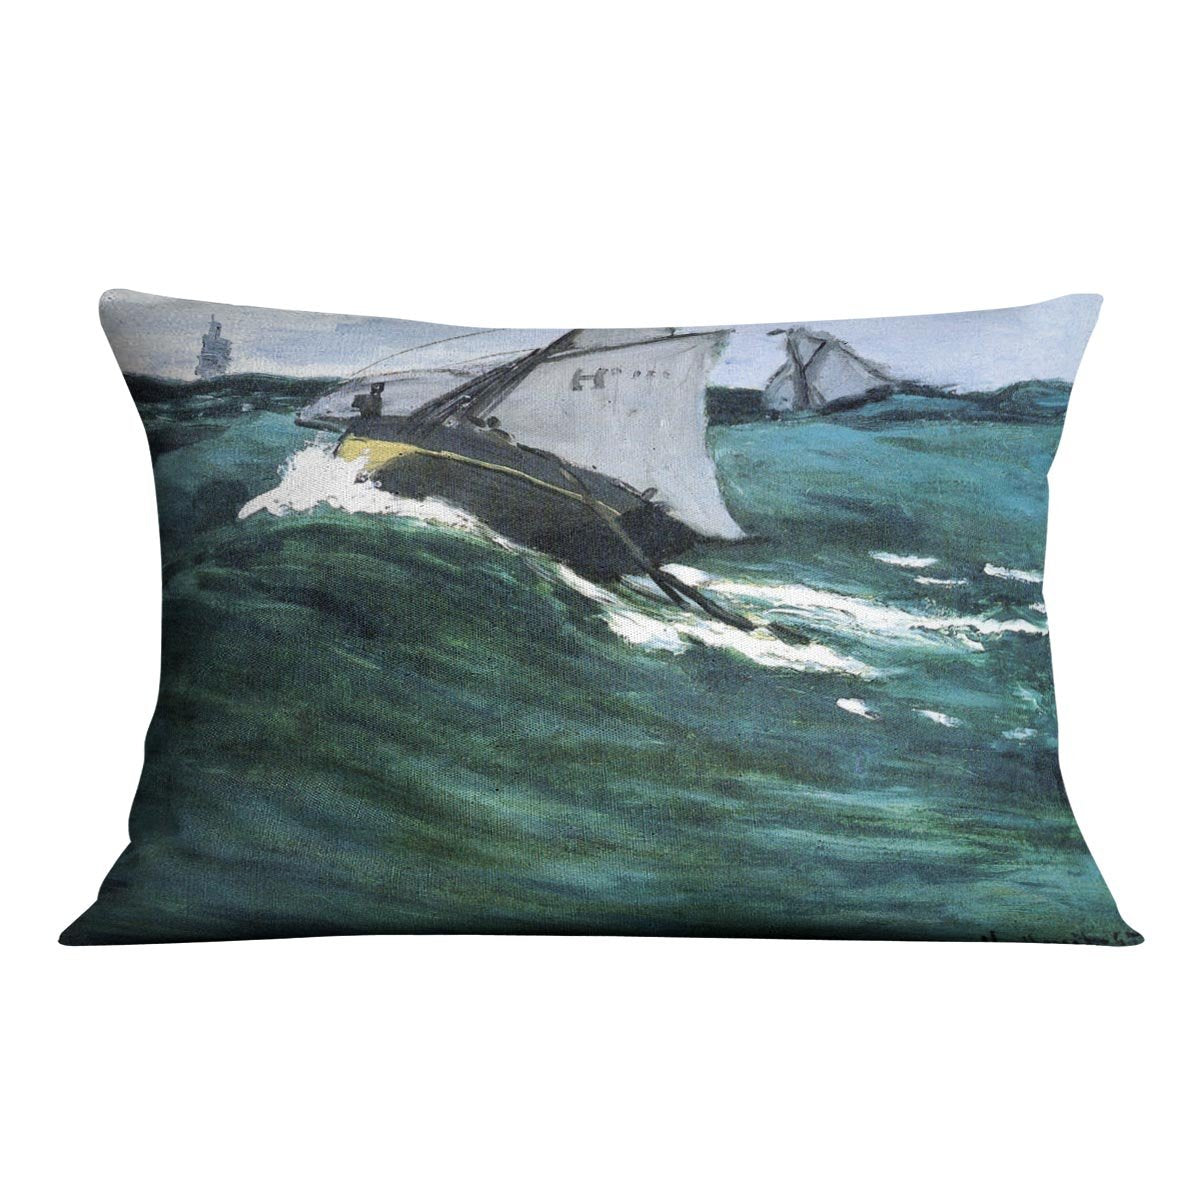 The green wave by Monet Throw Pillow